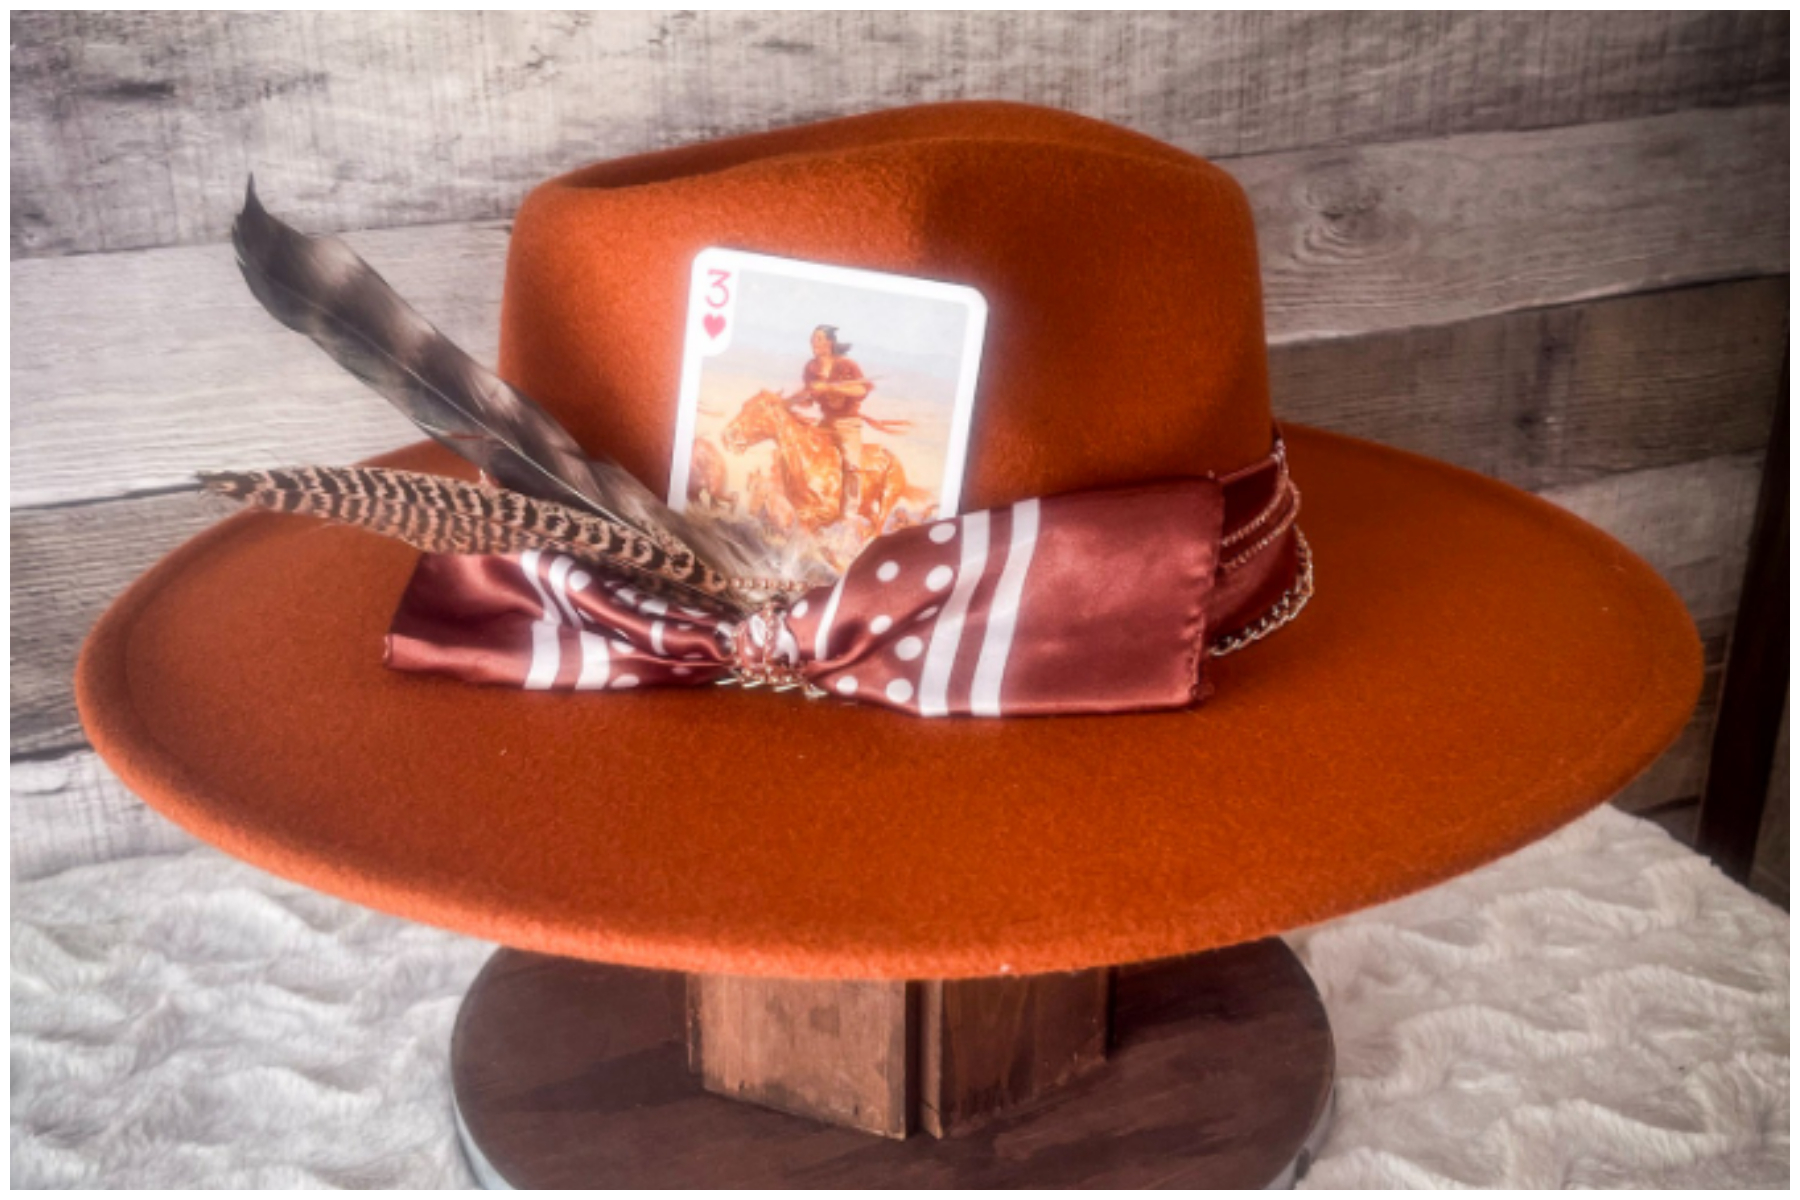 An orange-brimmed hat with embellishments